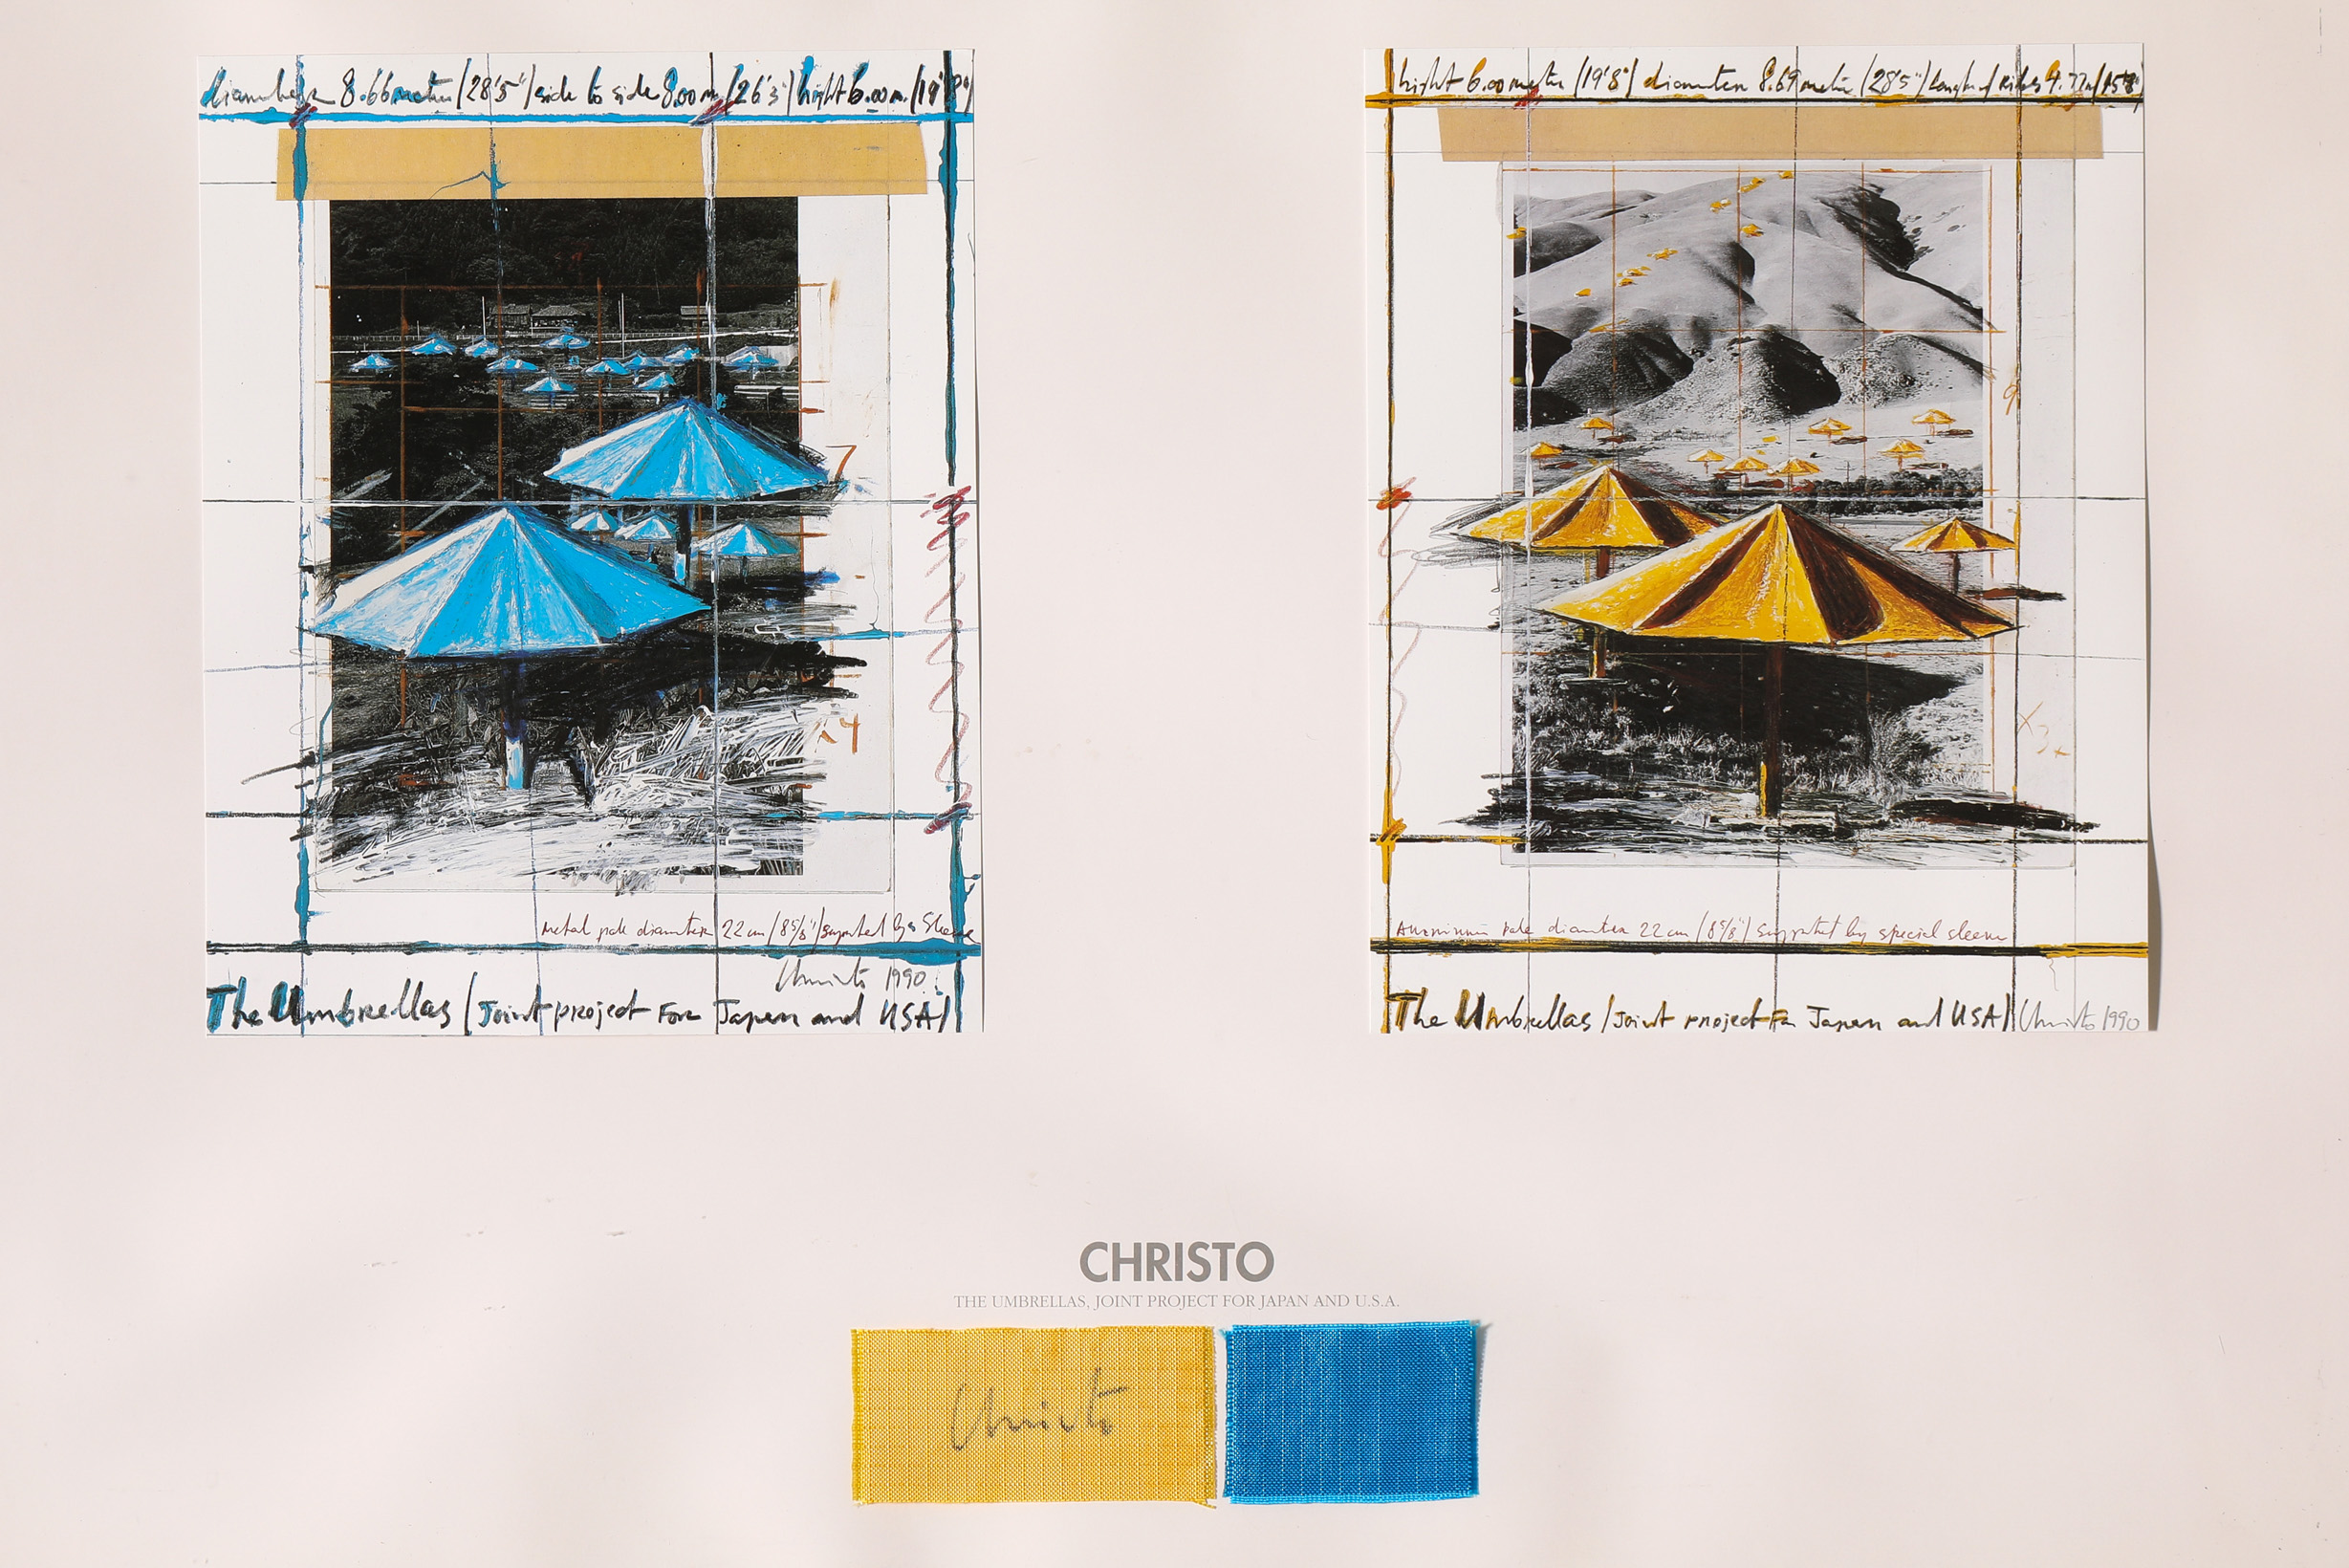 Christo*, The Umbrellas. Joint Project for Japan and U.S.A. 1991